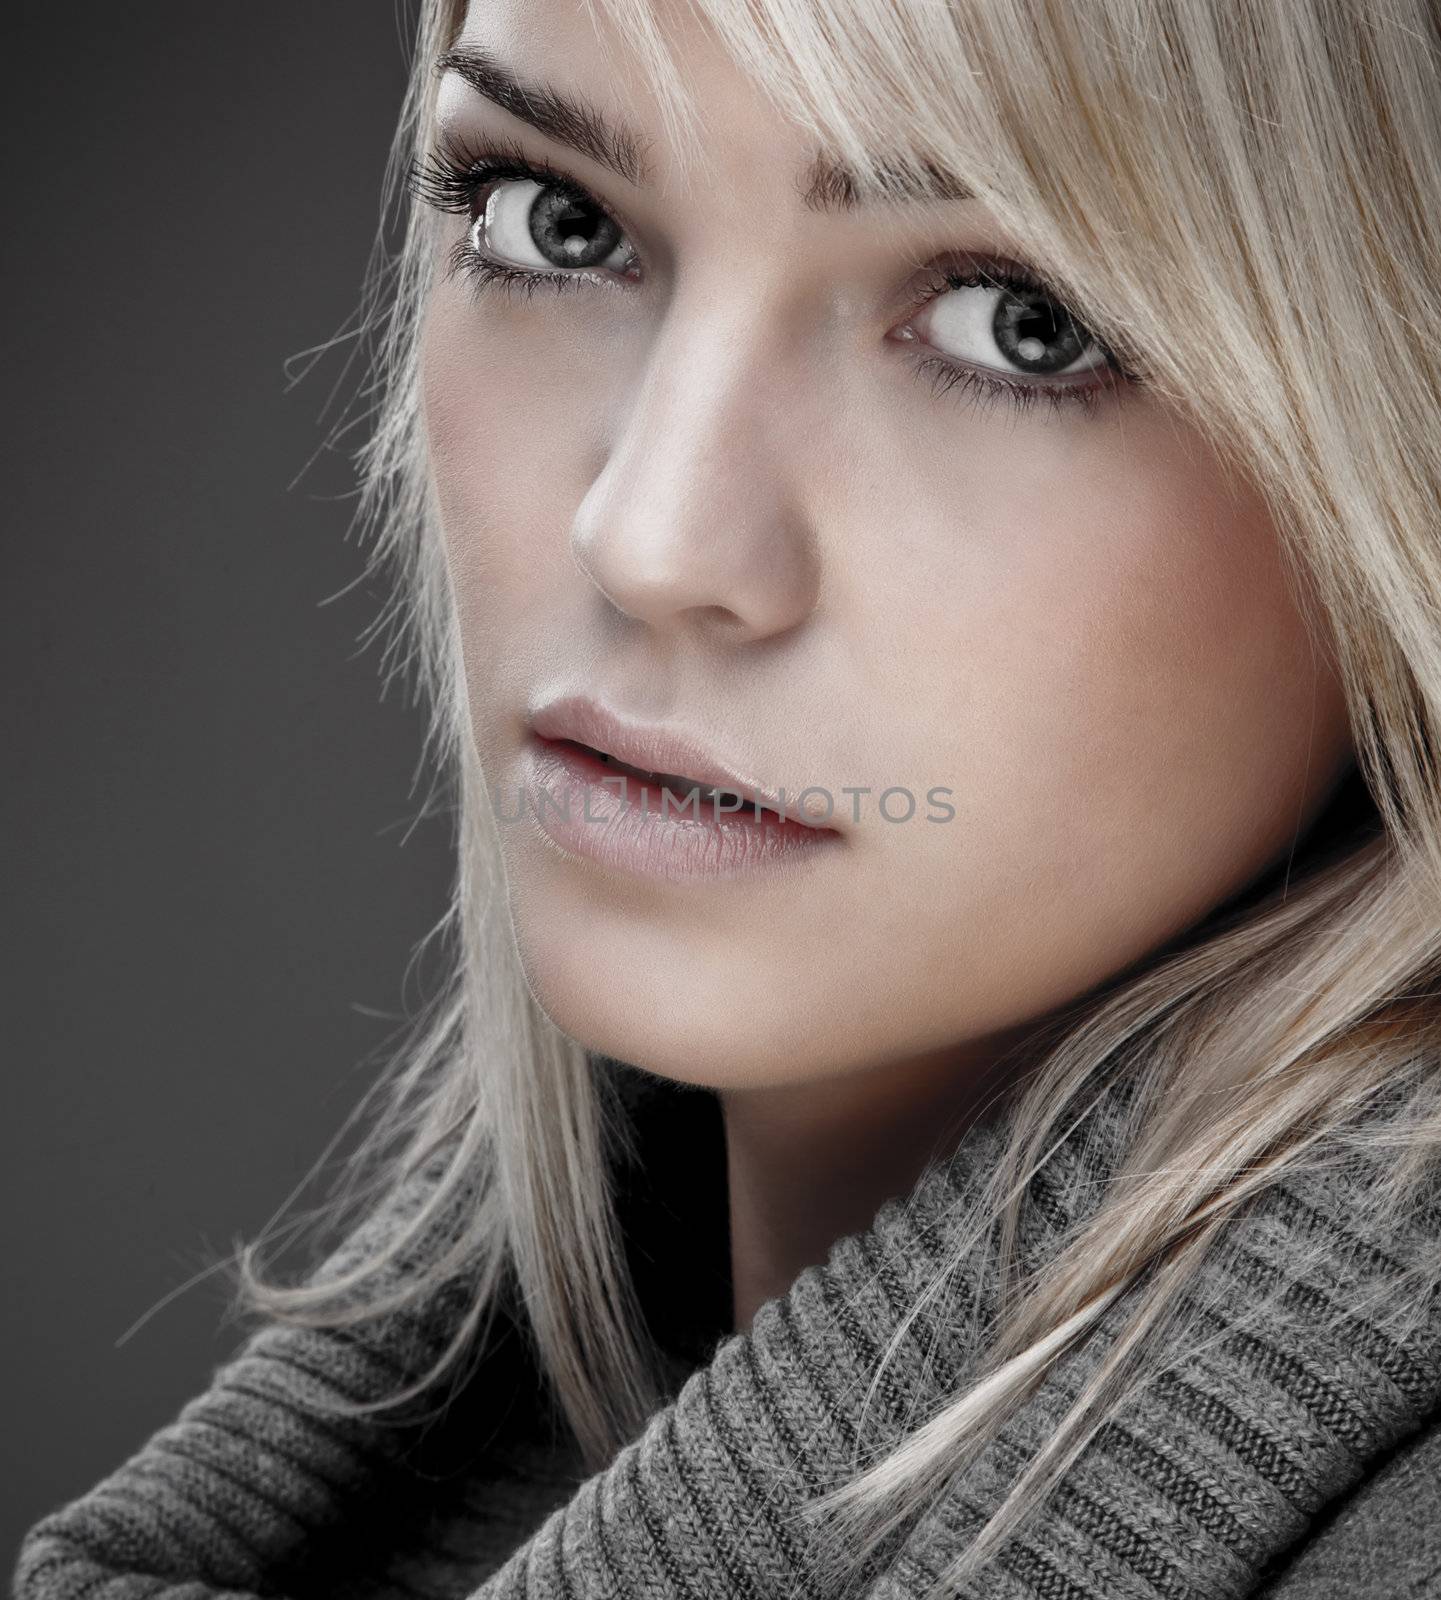 Sweet Blond Girl With Warm Collar by nfx702